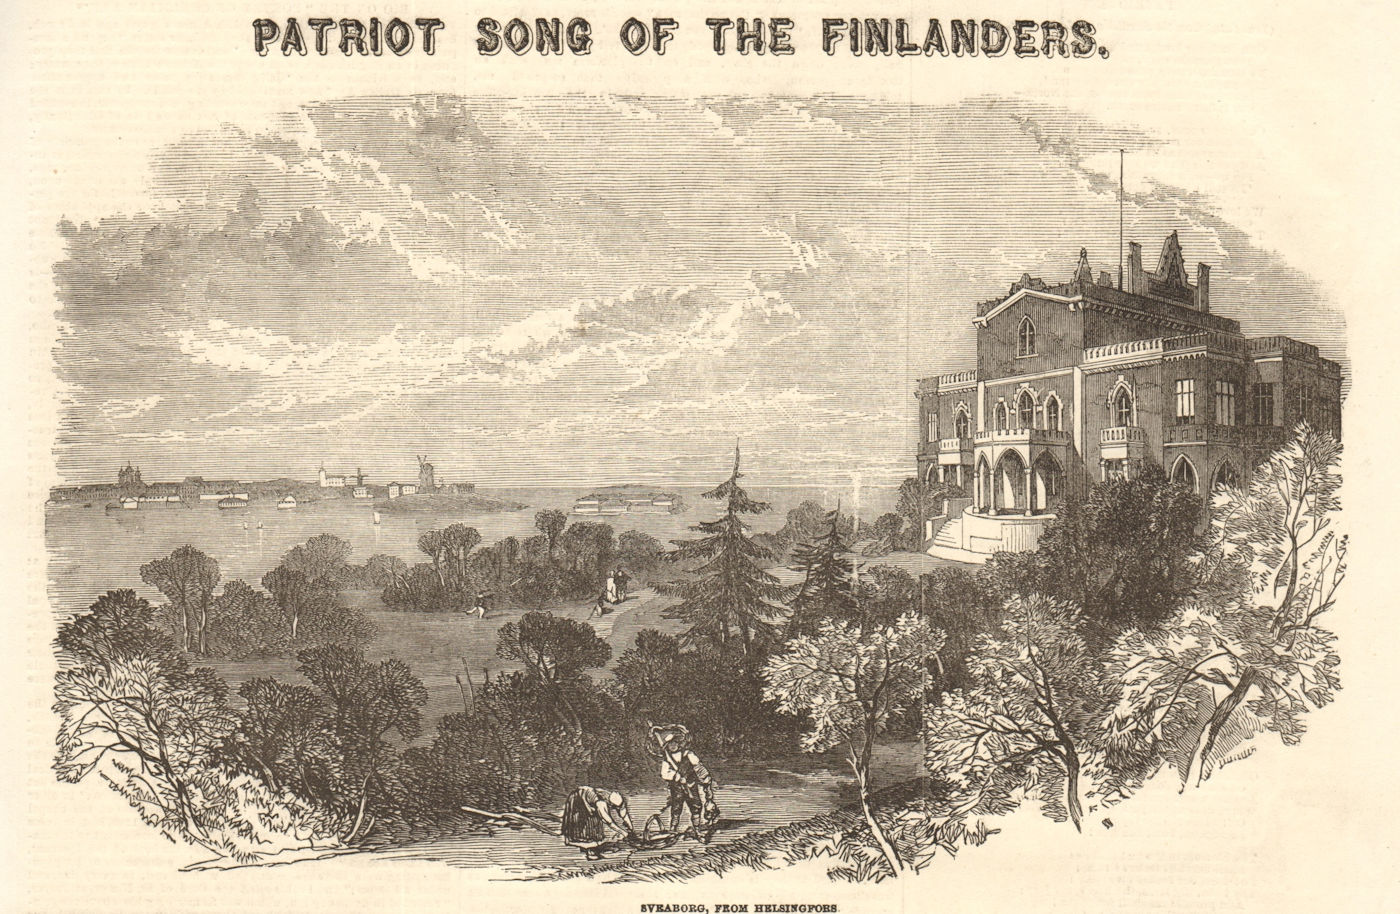 Associate Product Patriot song of the Finlanders: Sveaborg (Suomenlinna) from Helsinki 1854